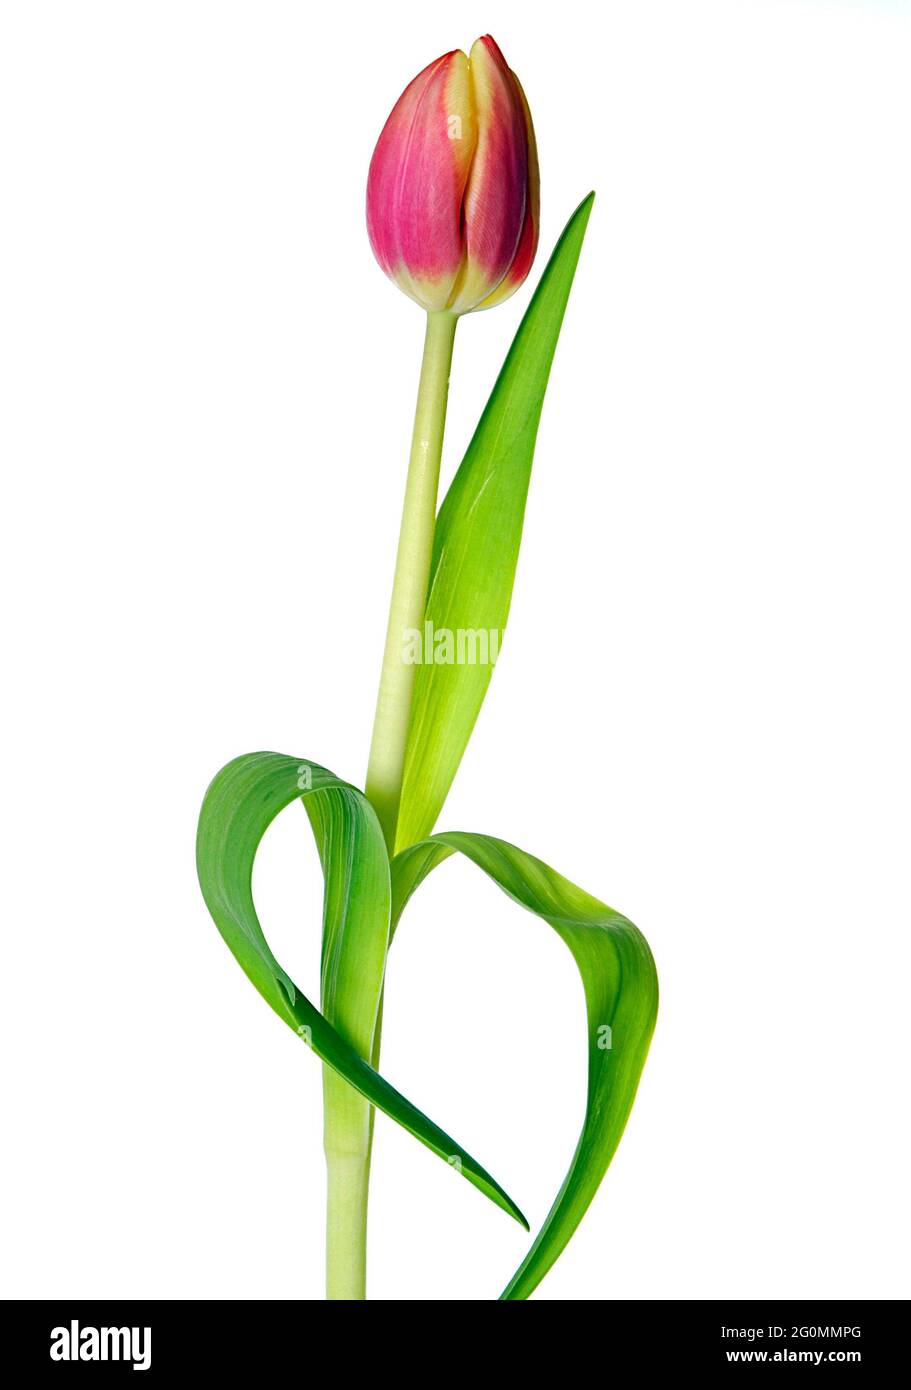 A high-key studio image (white background) of a full-length pink and yellow tulip (closed cup).  Also showing stem and leaves Stock Photo